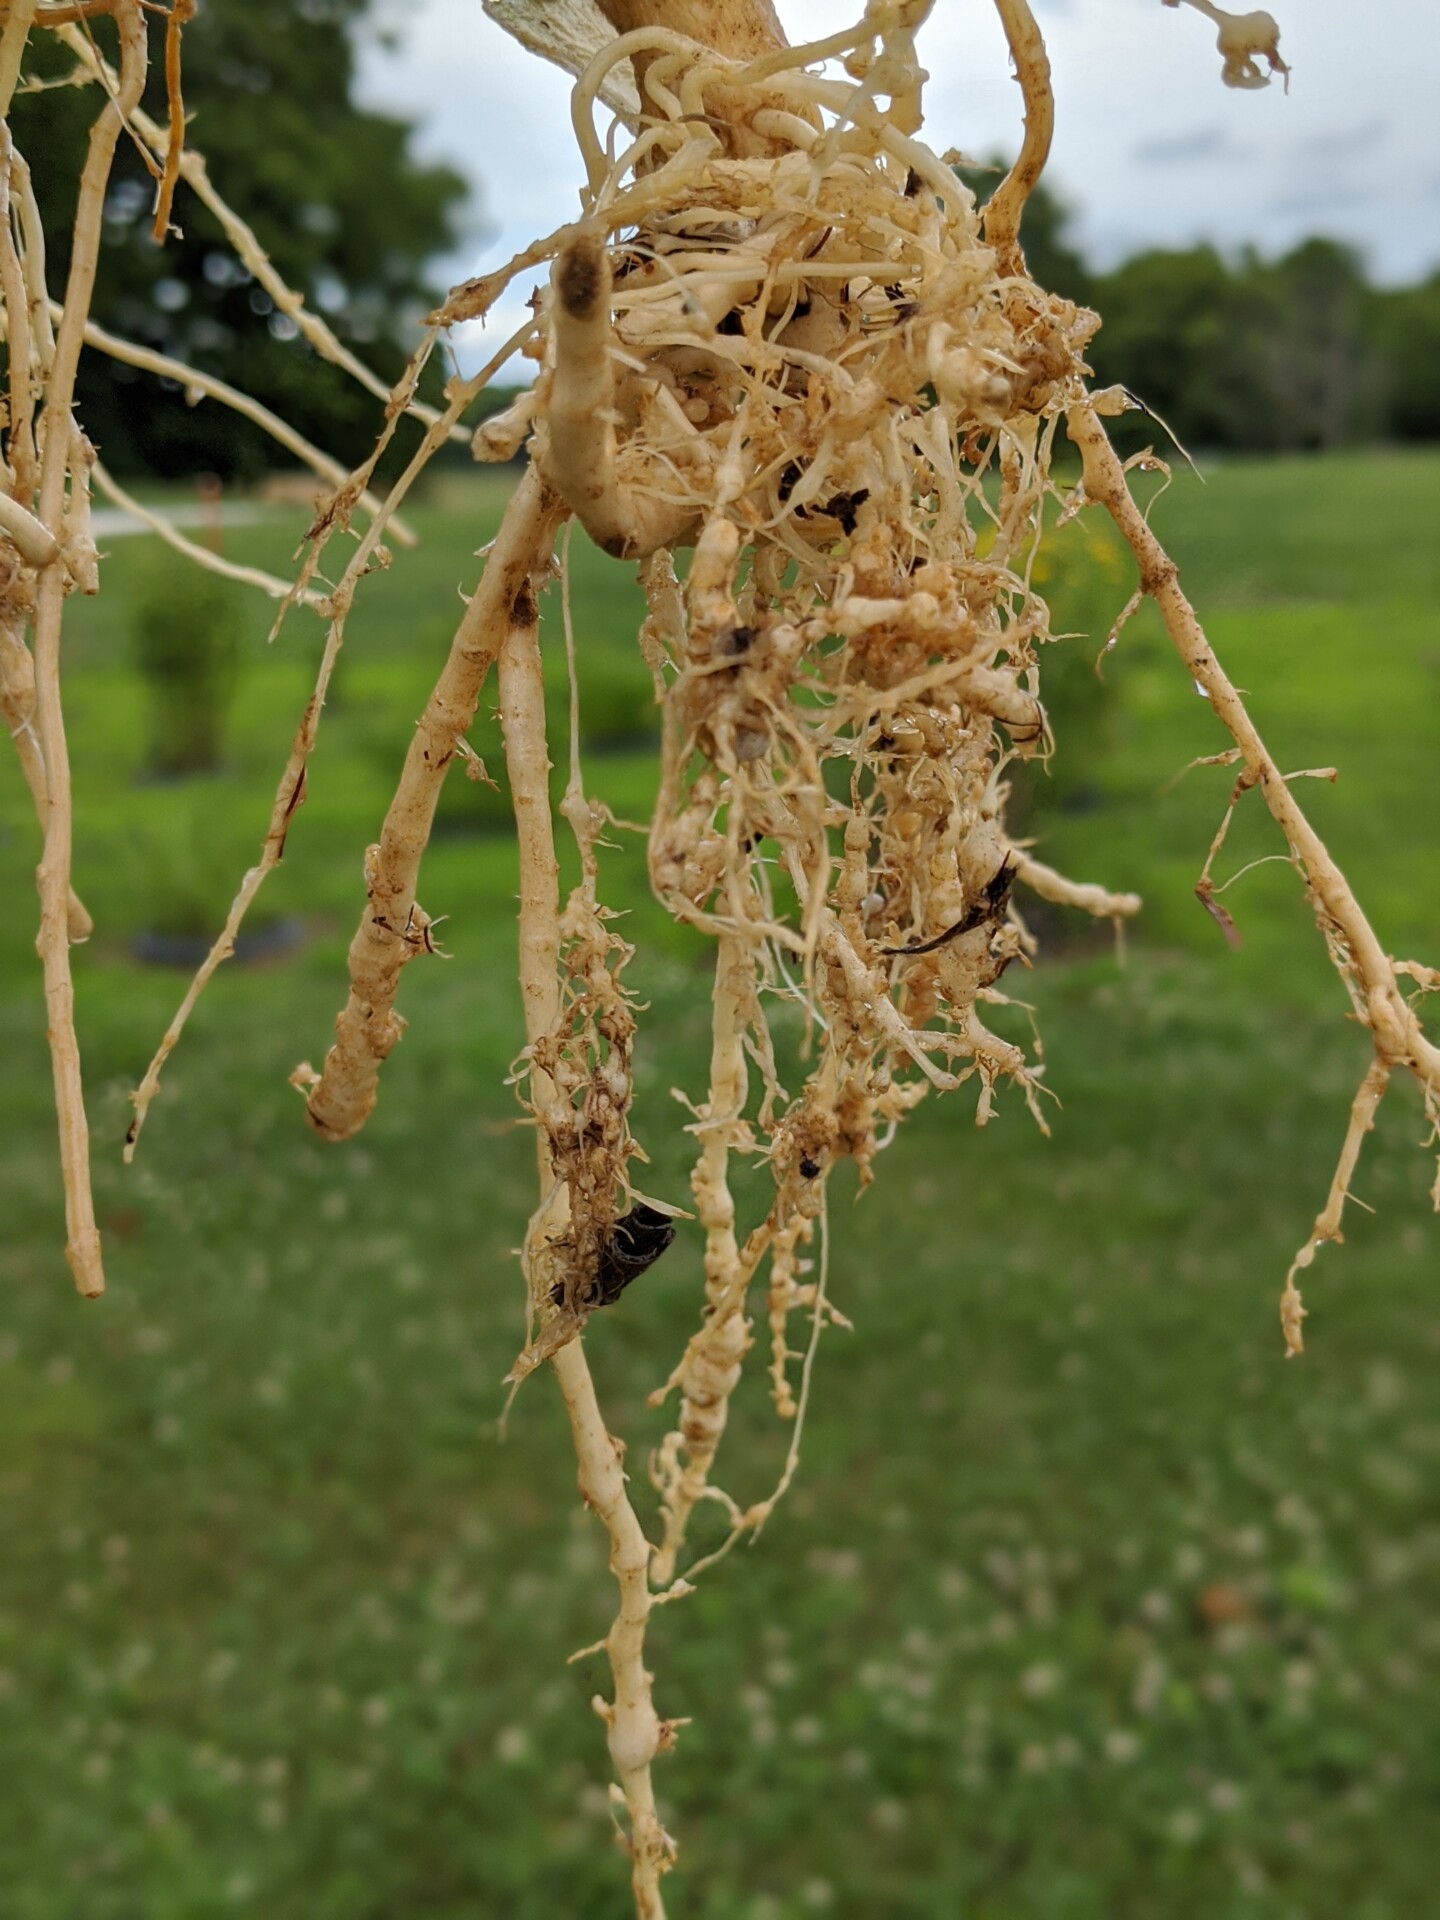 Figure 3. Root nematode galls on a watermelon root system that has been washed to reveal symptoms of root knot.